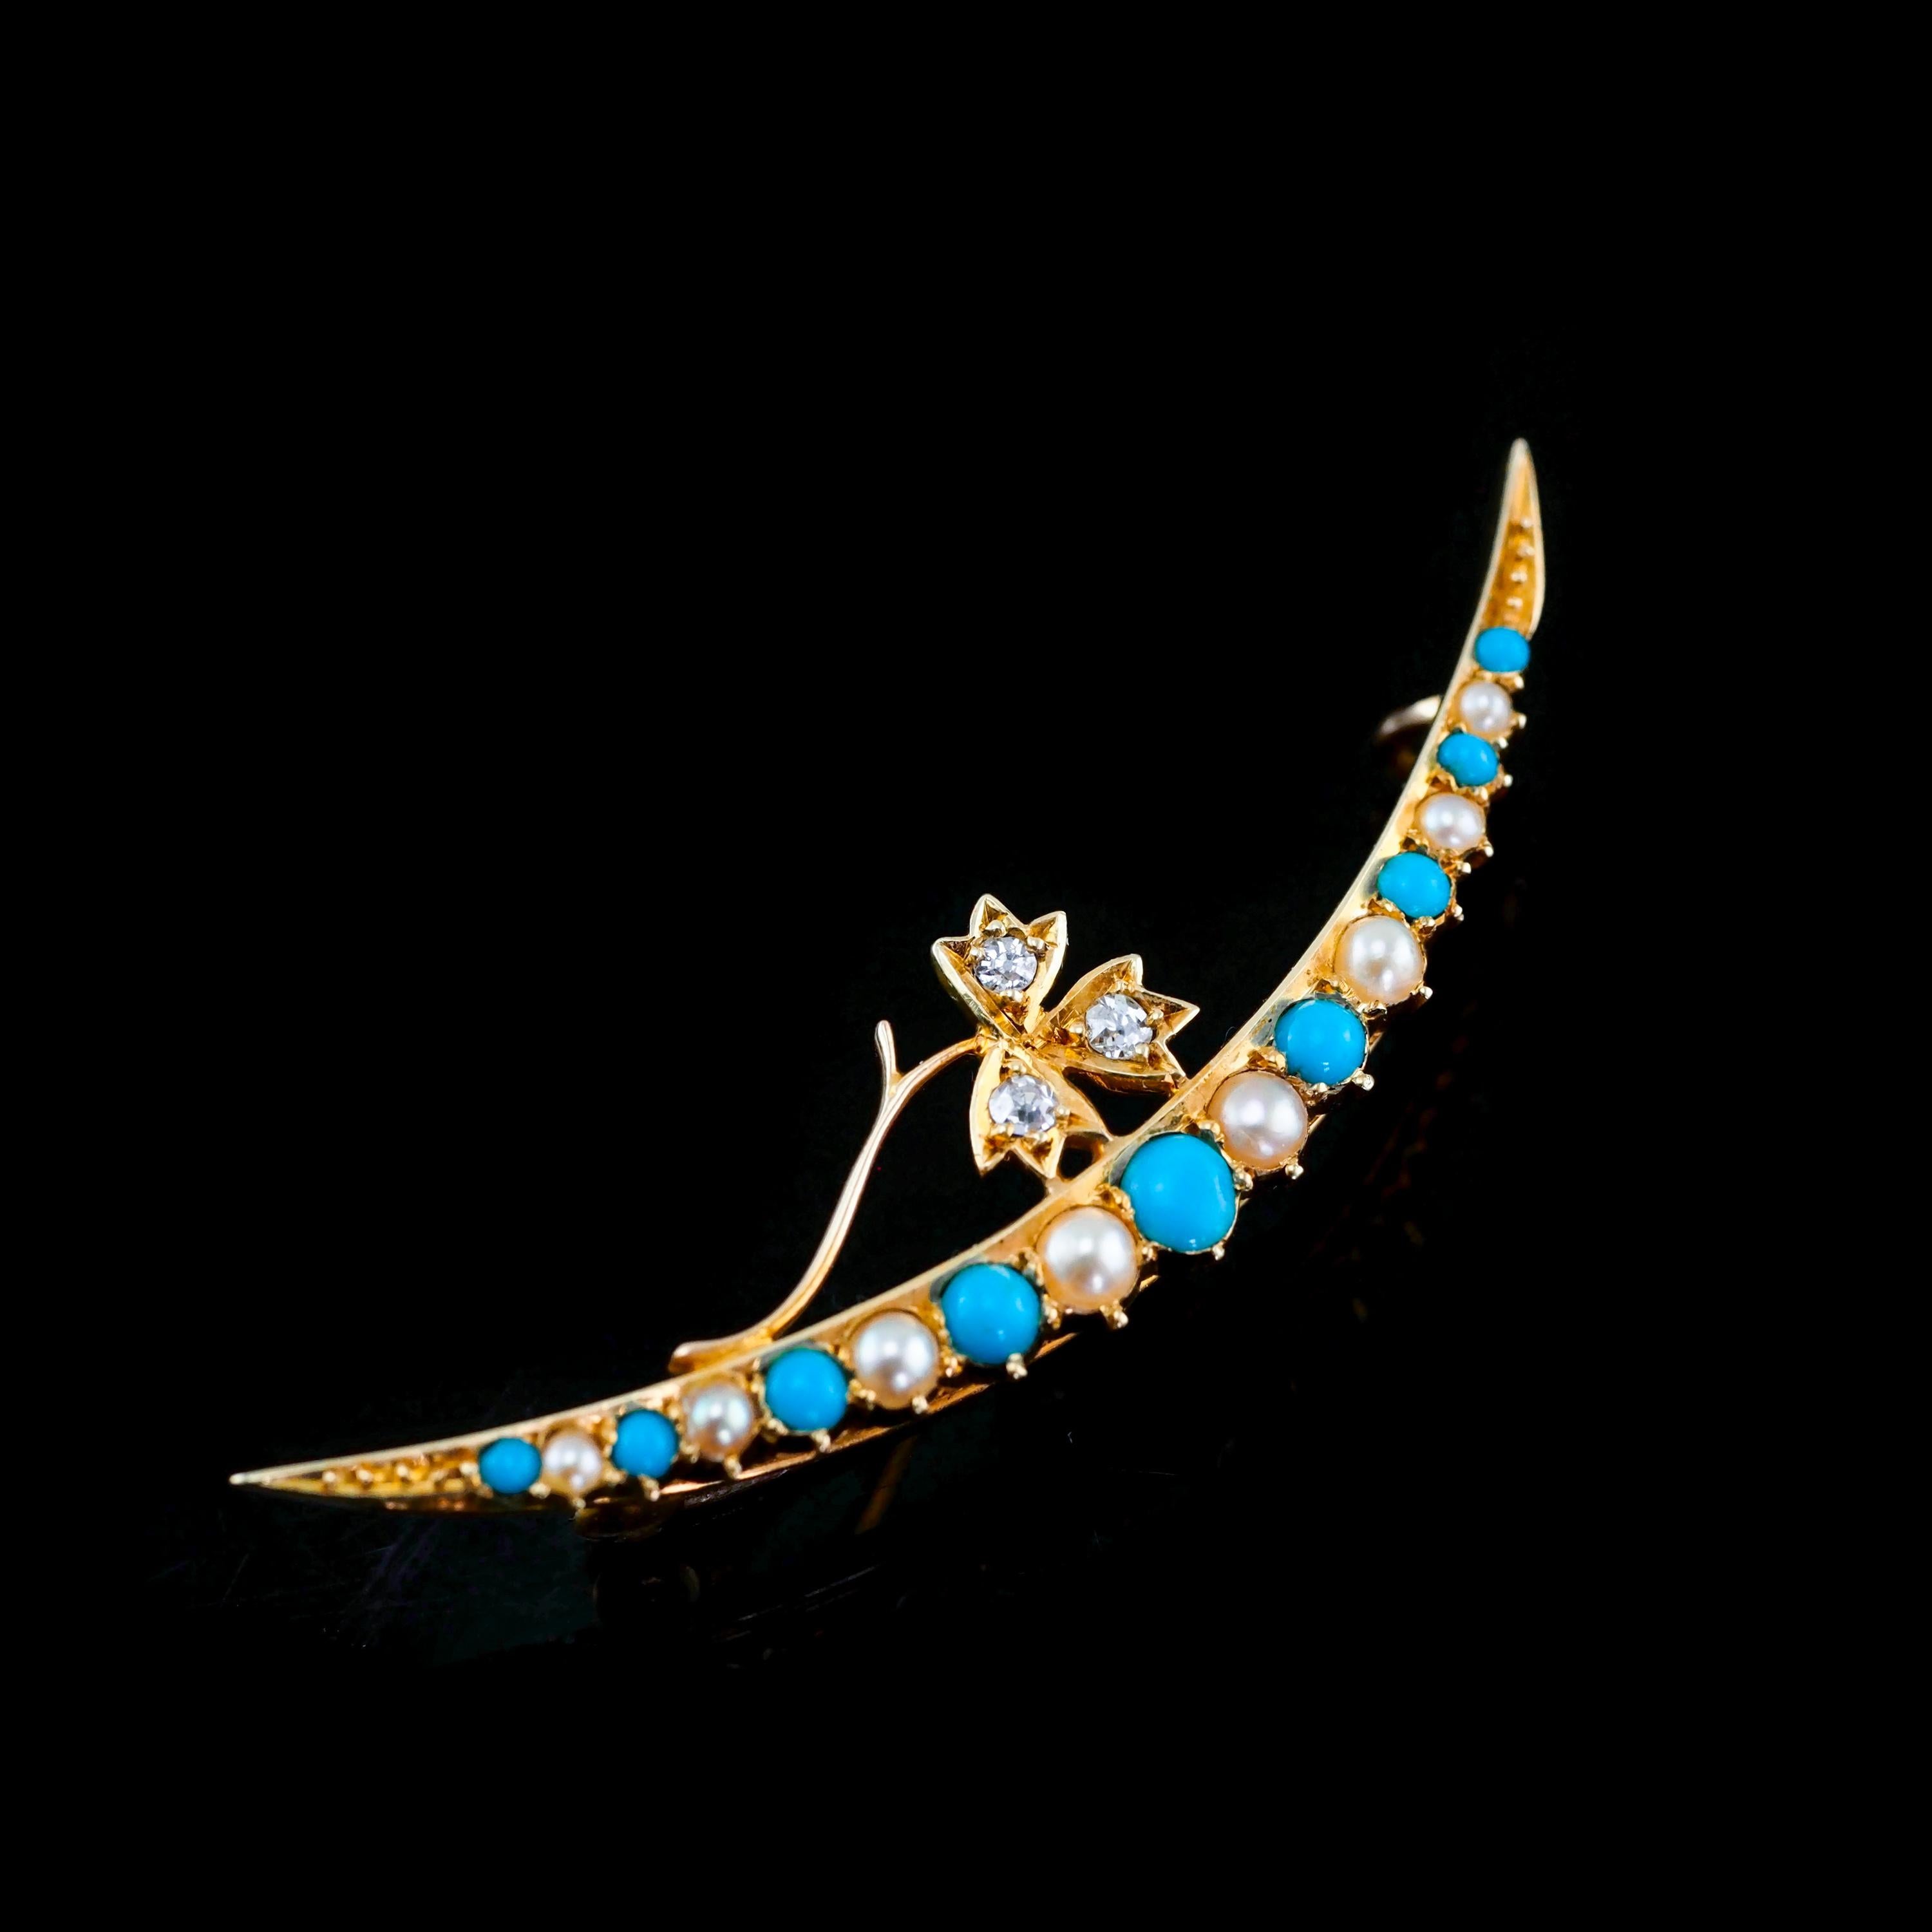 Antique Victorian 15k Gold Turquoise, Pearl & Diamond Crescent Brooch, c.1900 For Sale 6